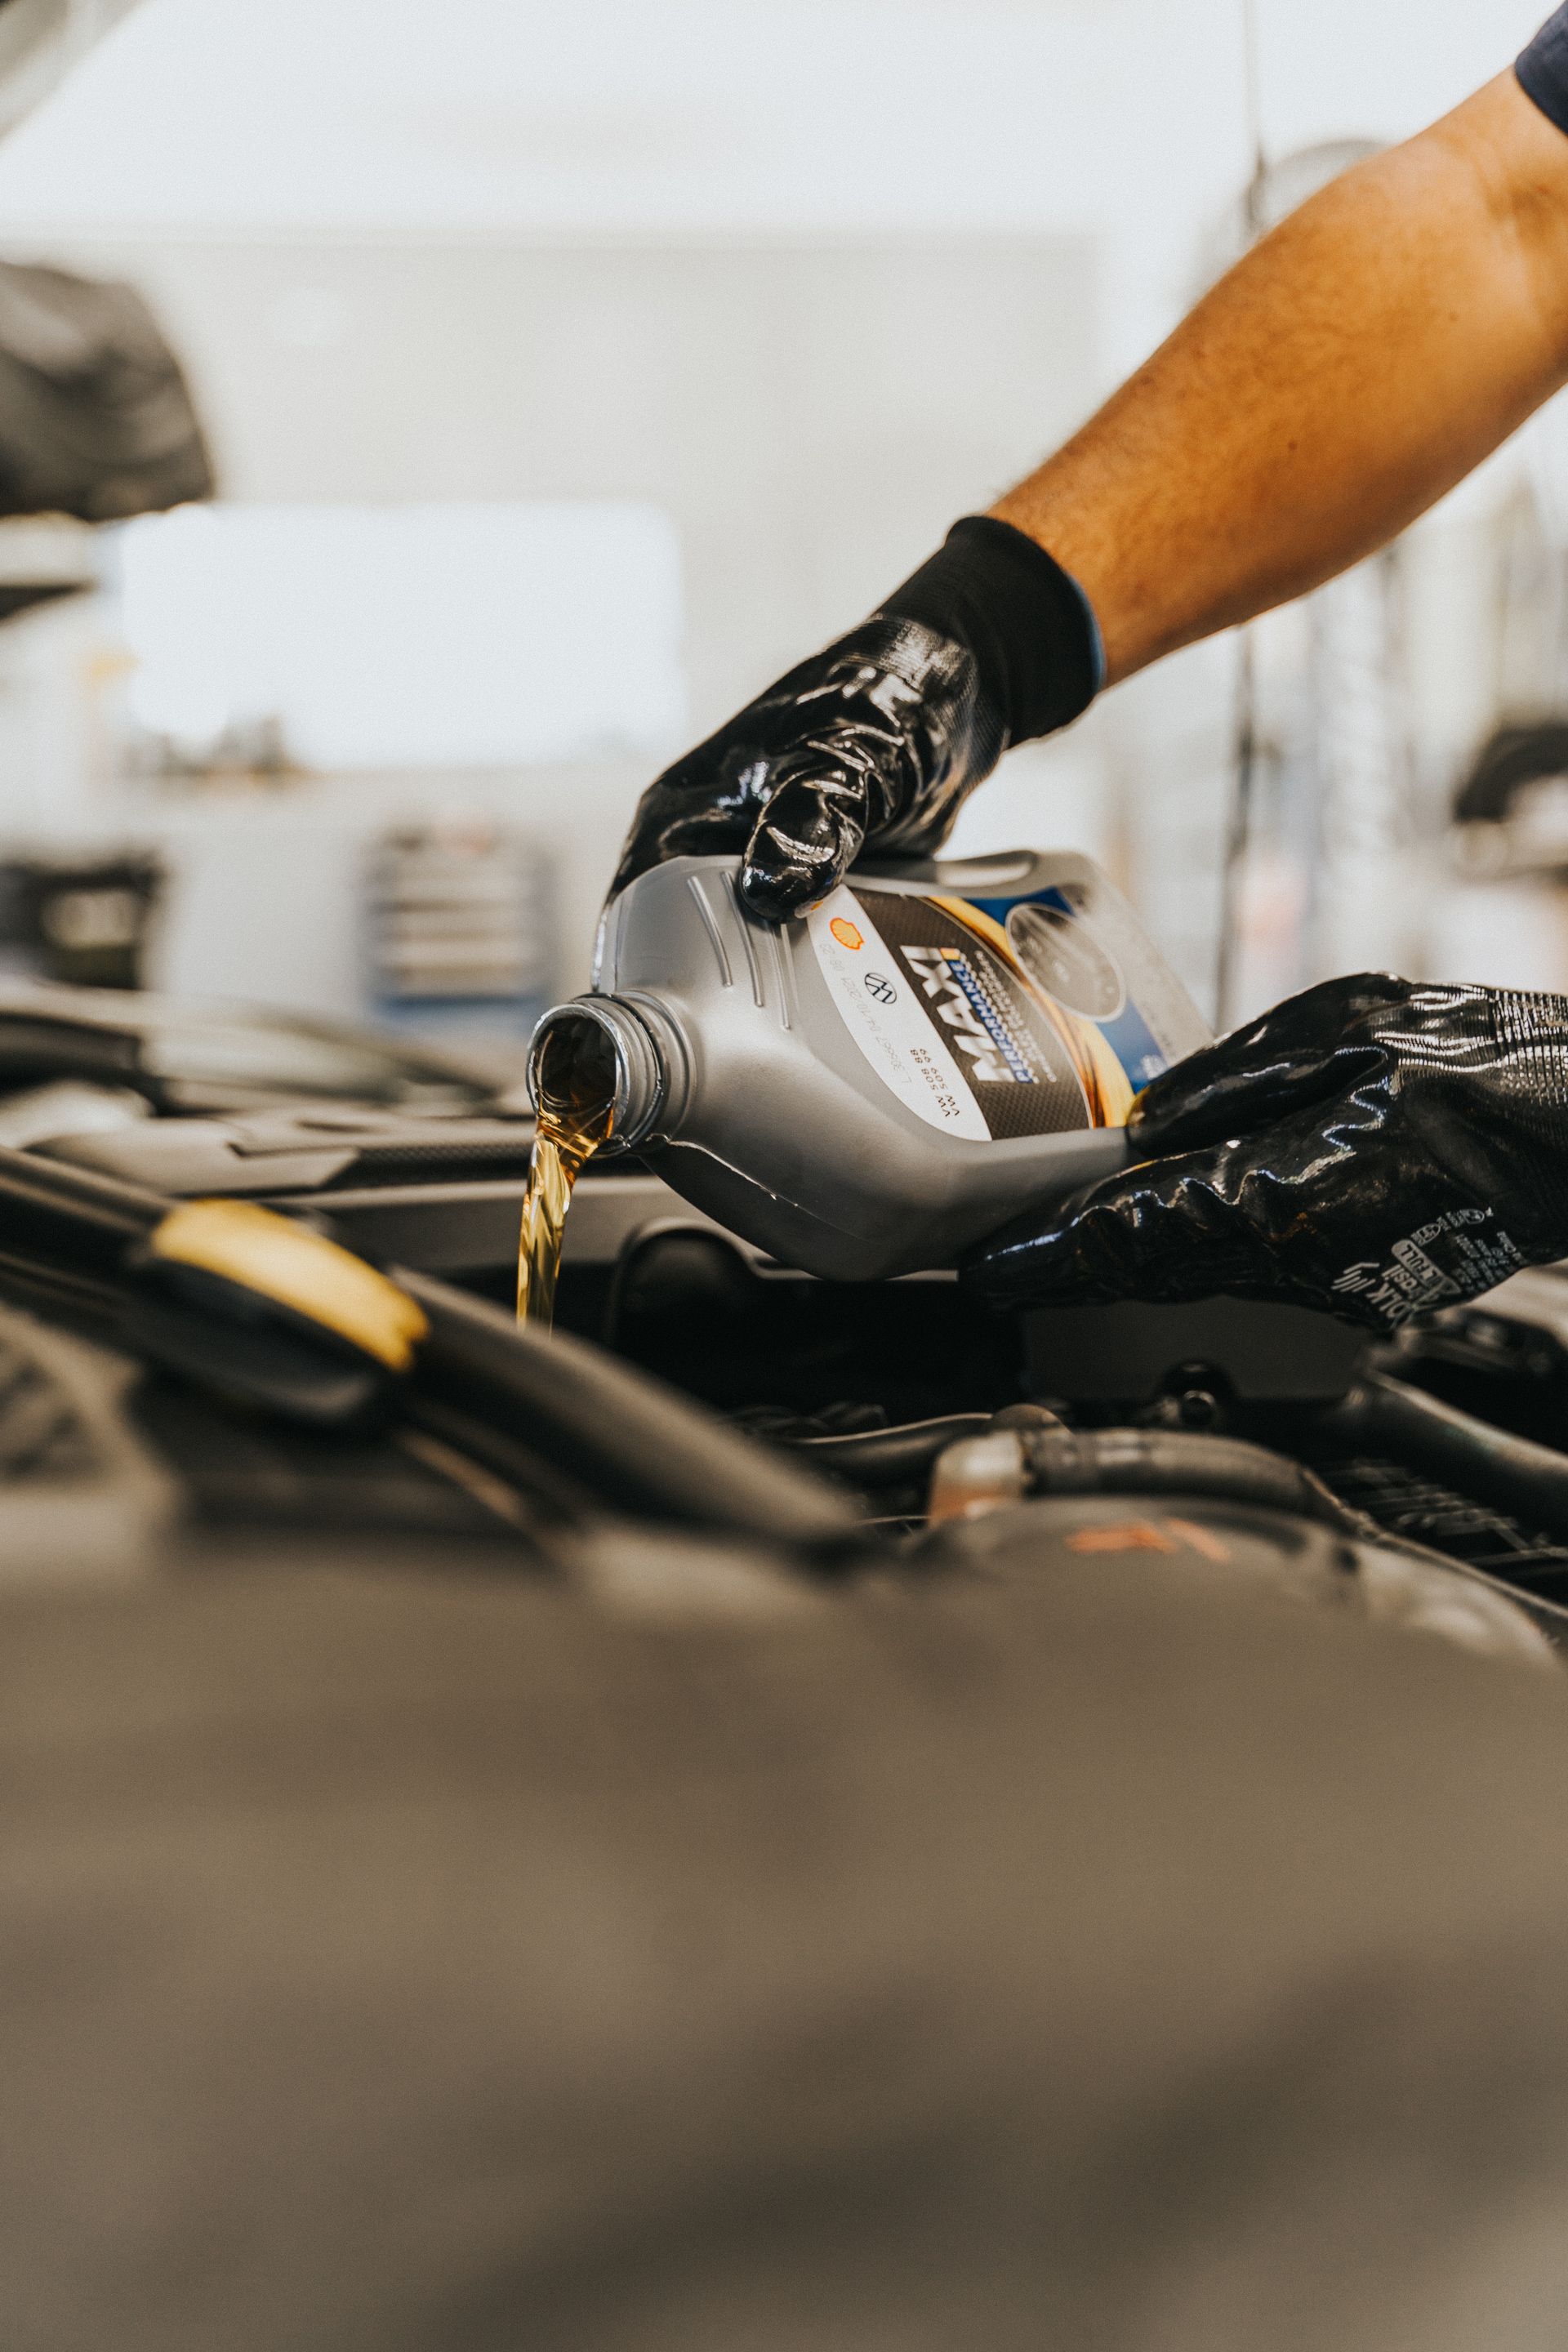 Mechanic Topping Off Motor Oil | PRO-CAT Auto Care & Repair in Toms River